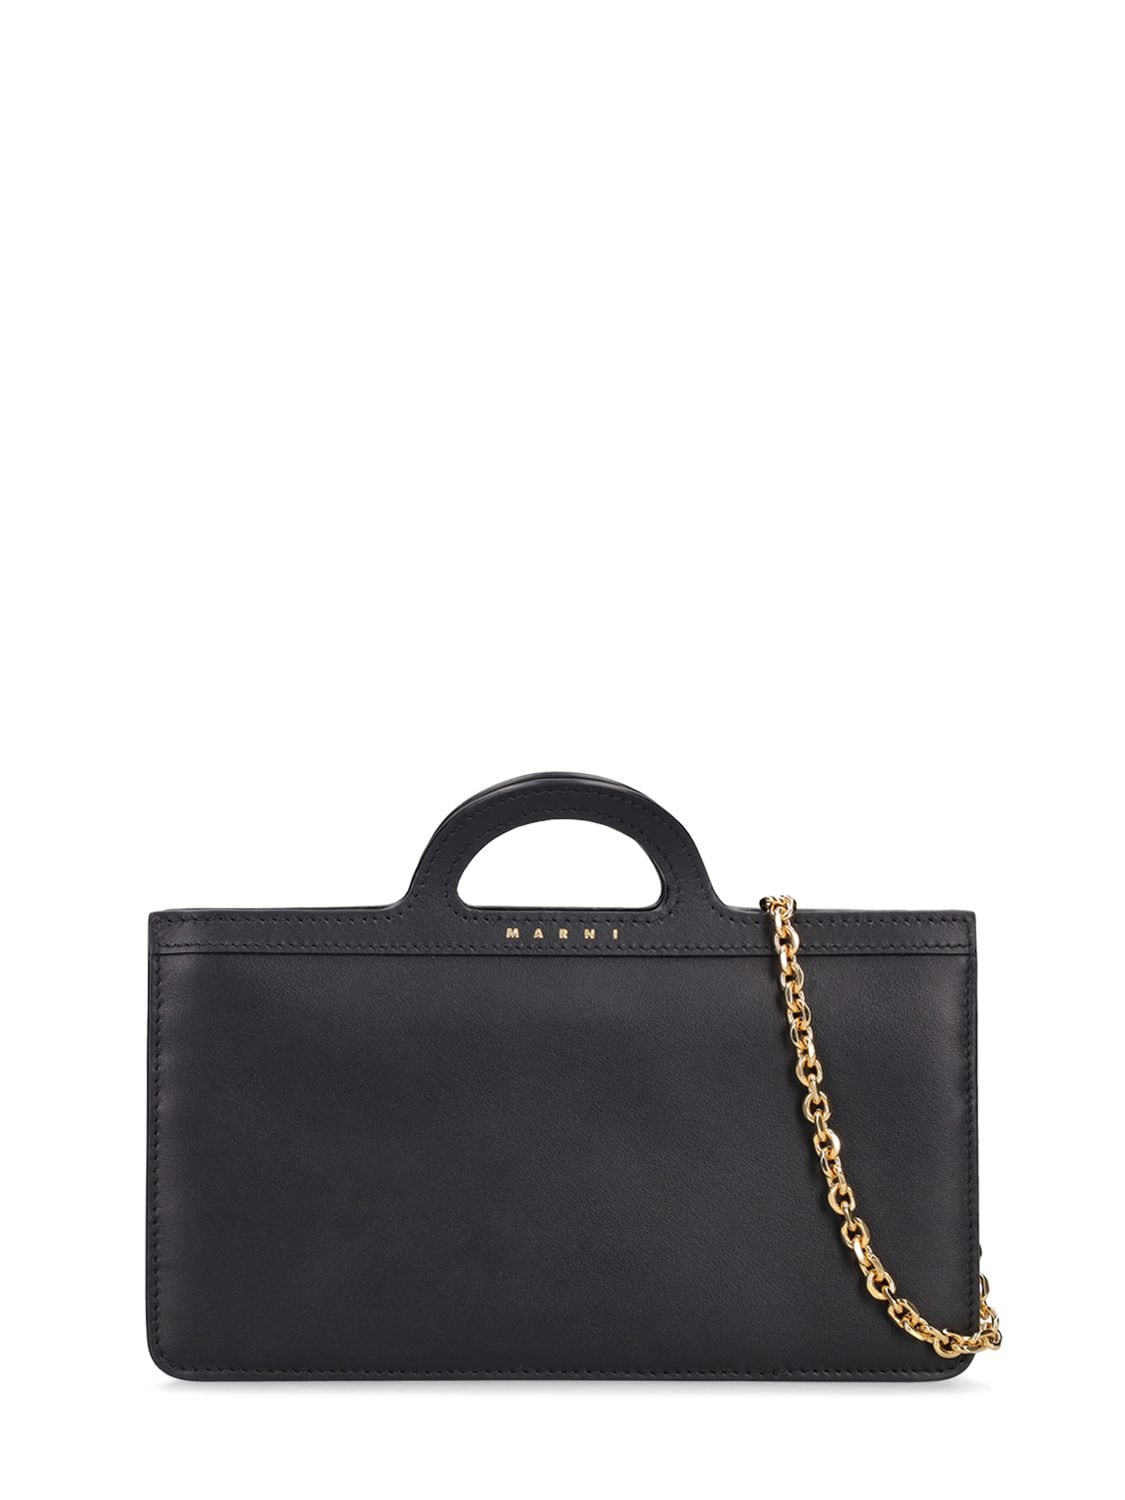 Marni Long Leather Chain Wallet In Black